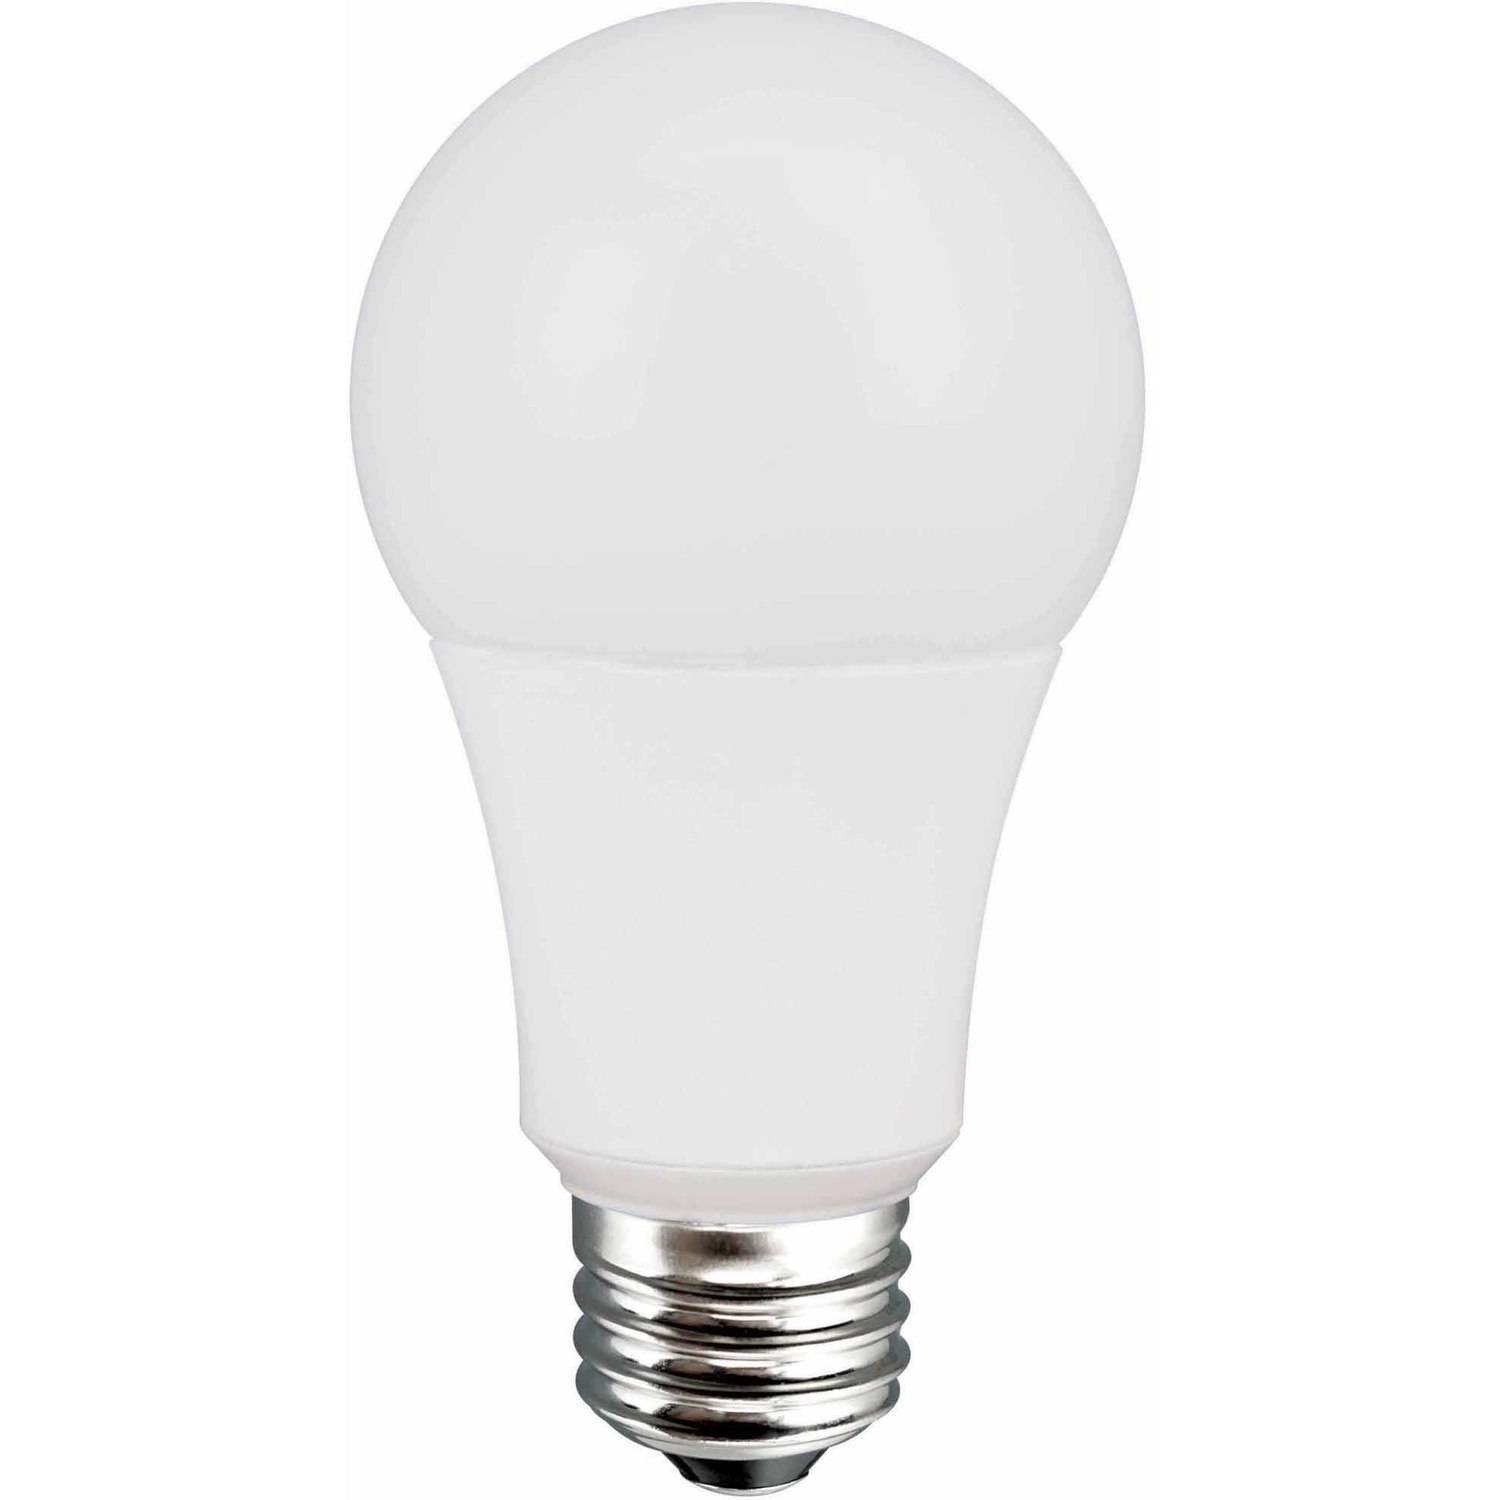 Great Value LED Light Bulb, 10W (60W Equivalent) A19 Lamp E26 Medium Base, Dimmable, Daylight - image 3 of 6